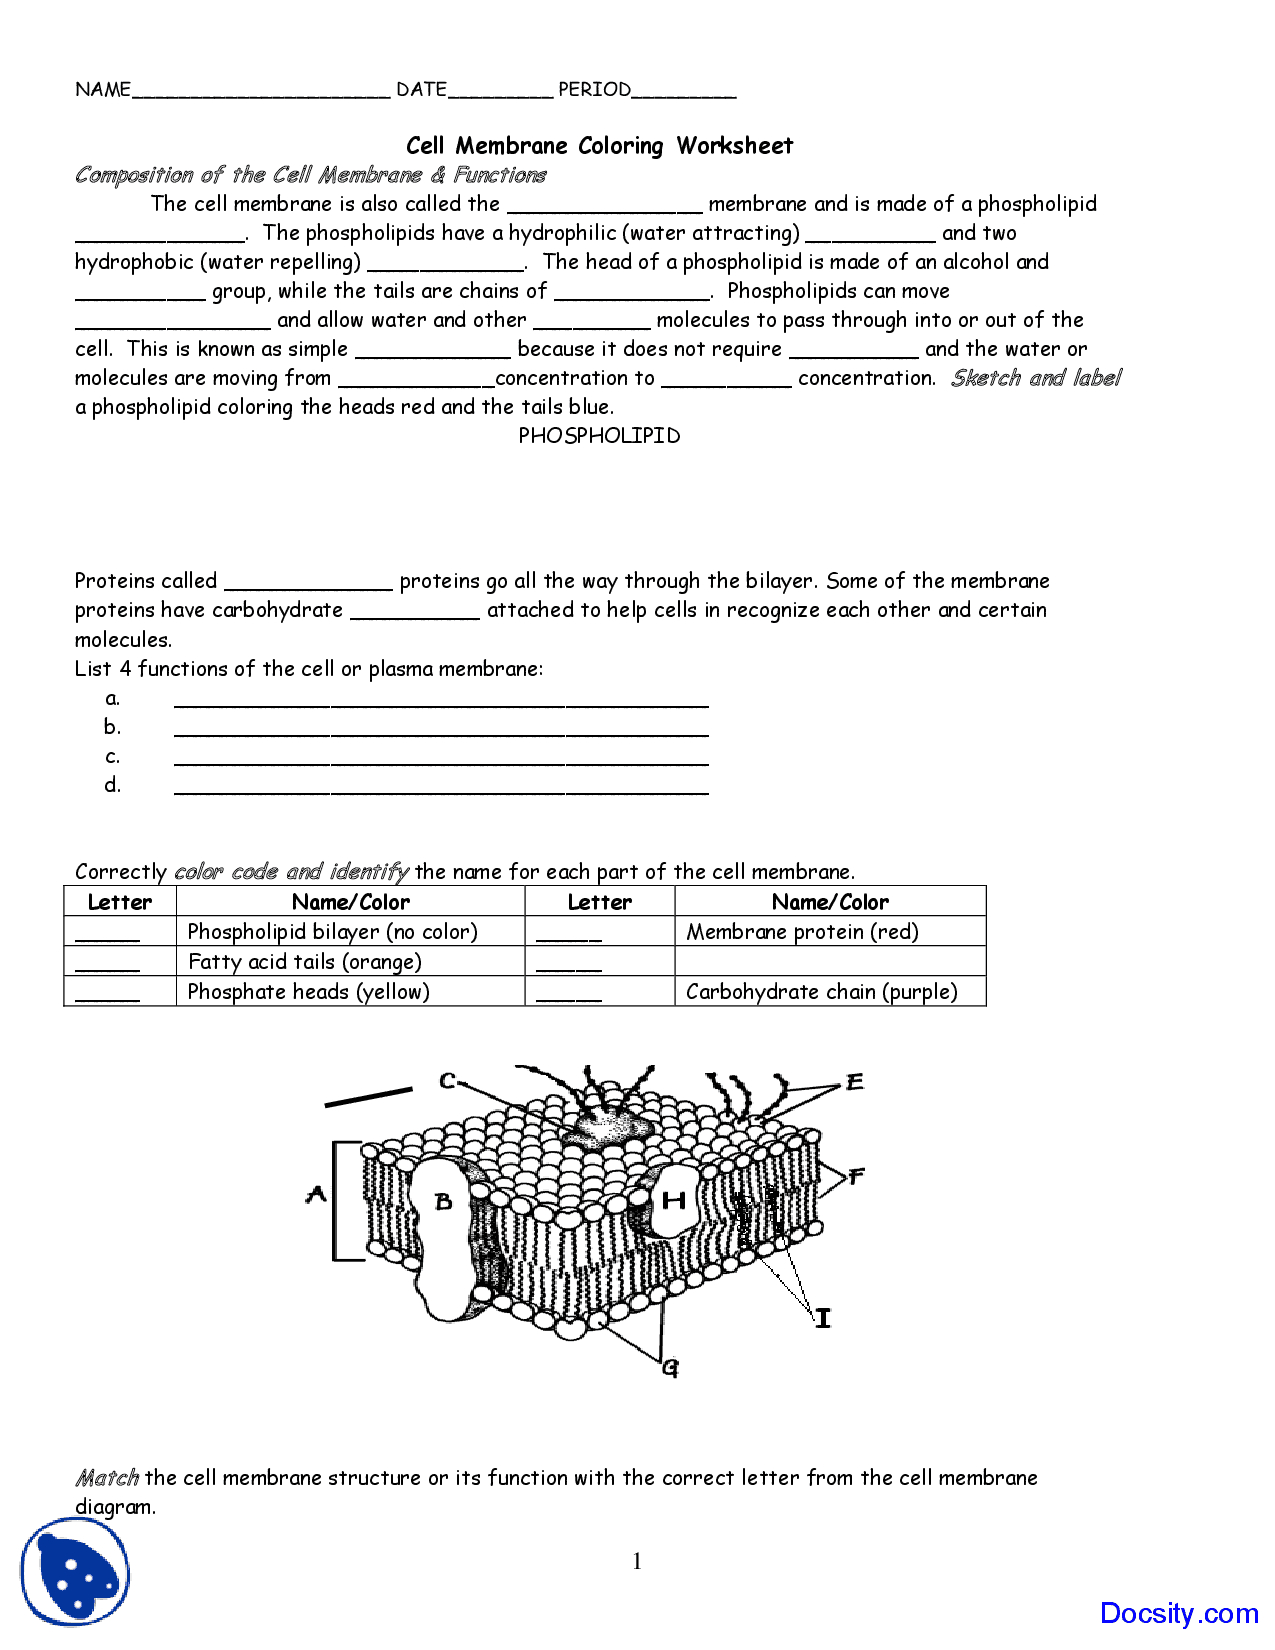 Cell Membrane Coloring  Application Of Biology  Assignment  Docsity And Cell Membrane Worksheet